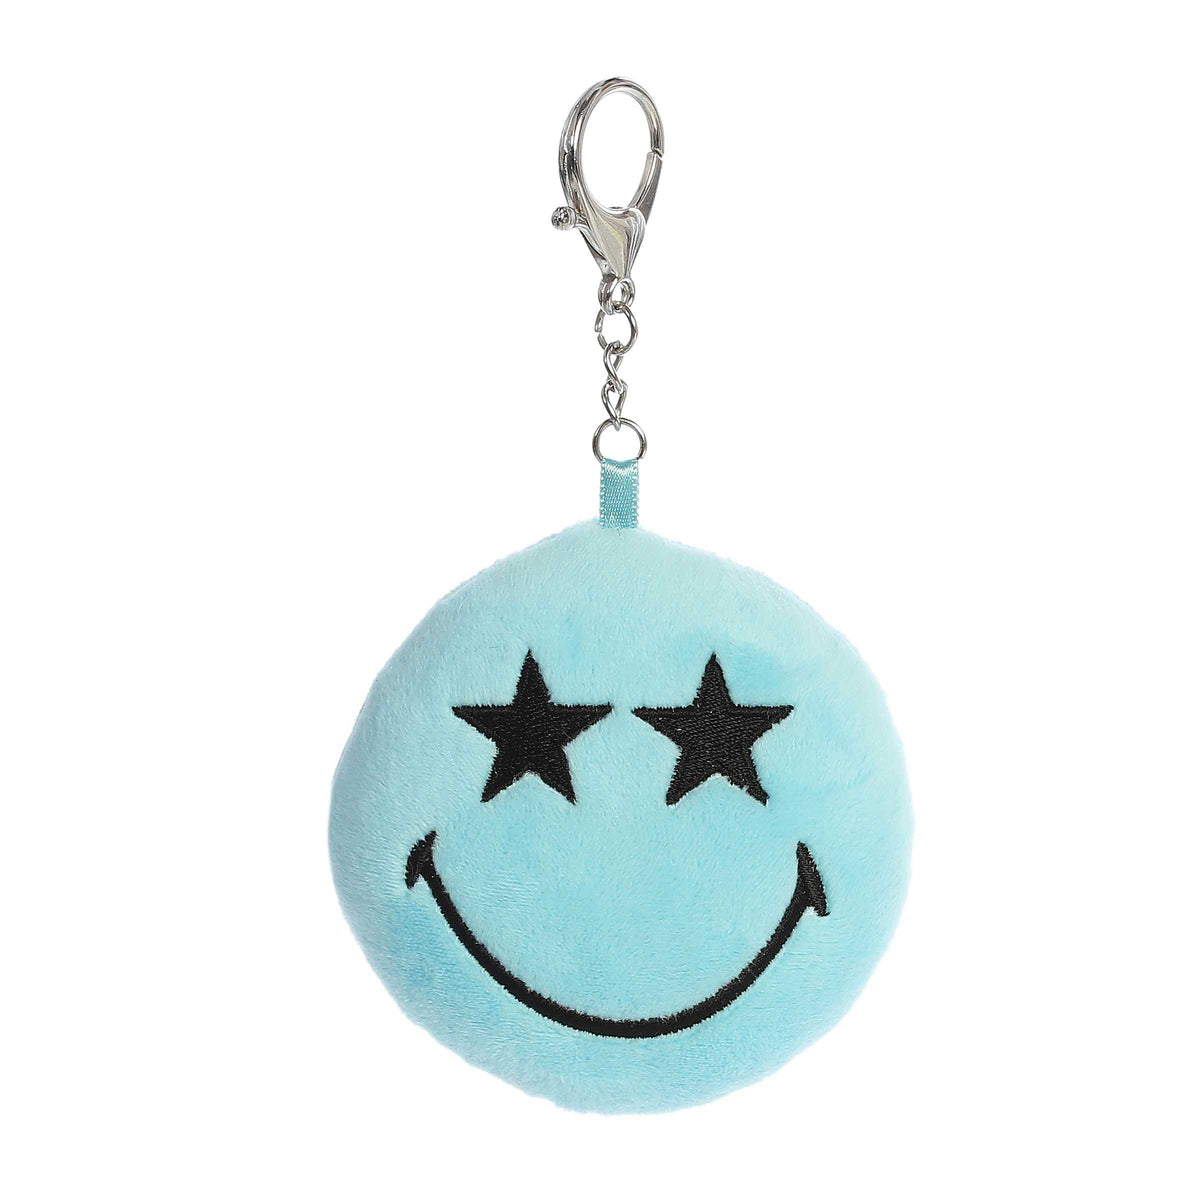 Star Clip-On from SmileyWorld, a charming blue plush keychain with starry eyes